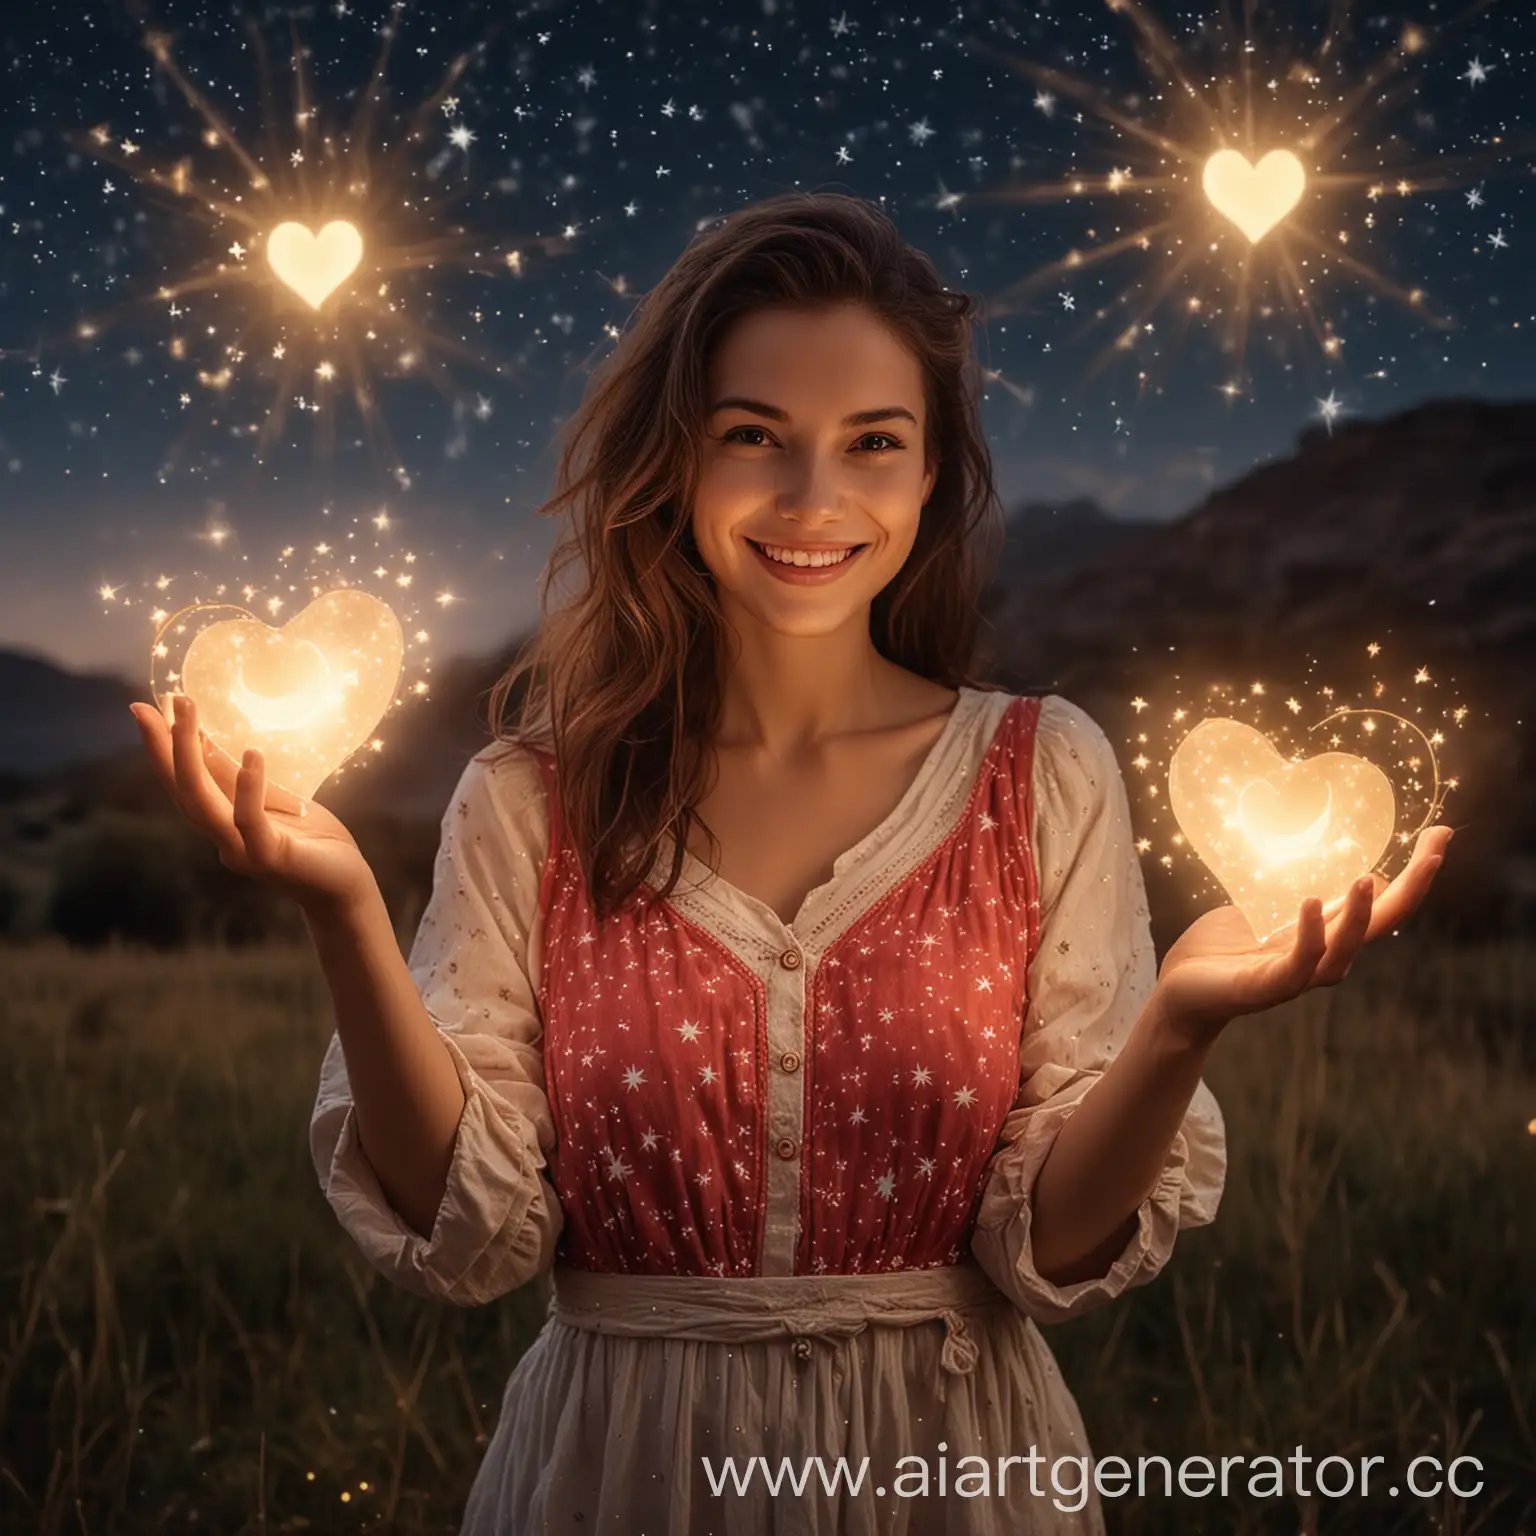 Smiling-Woman-Holding-Glowing-Hearts-Under-Starlit-Sky